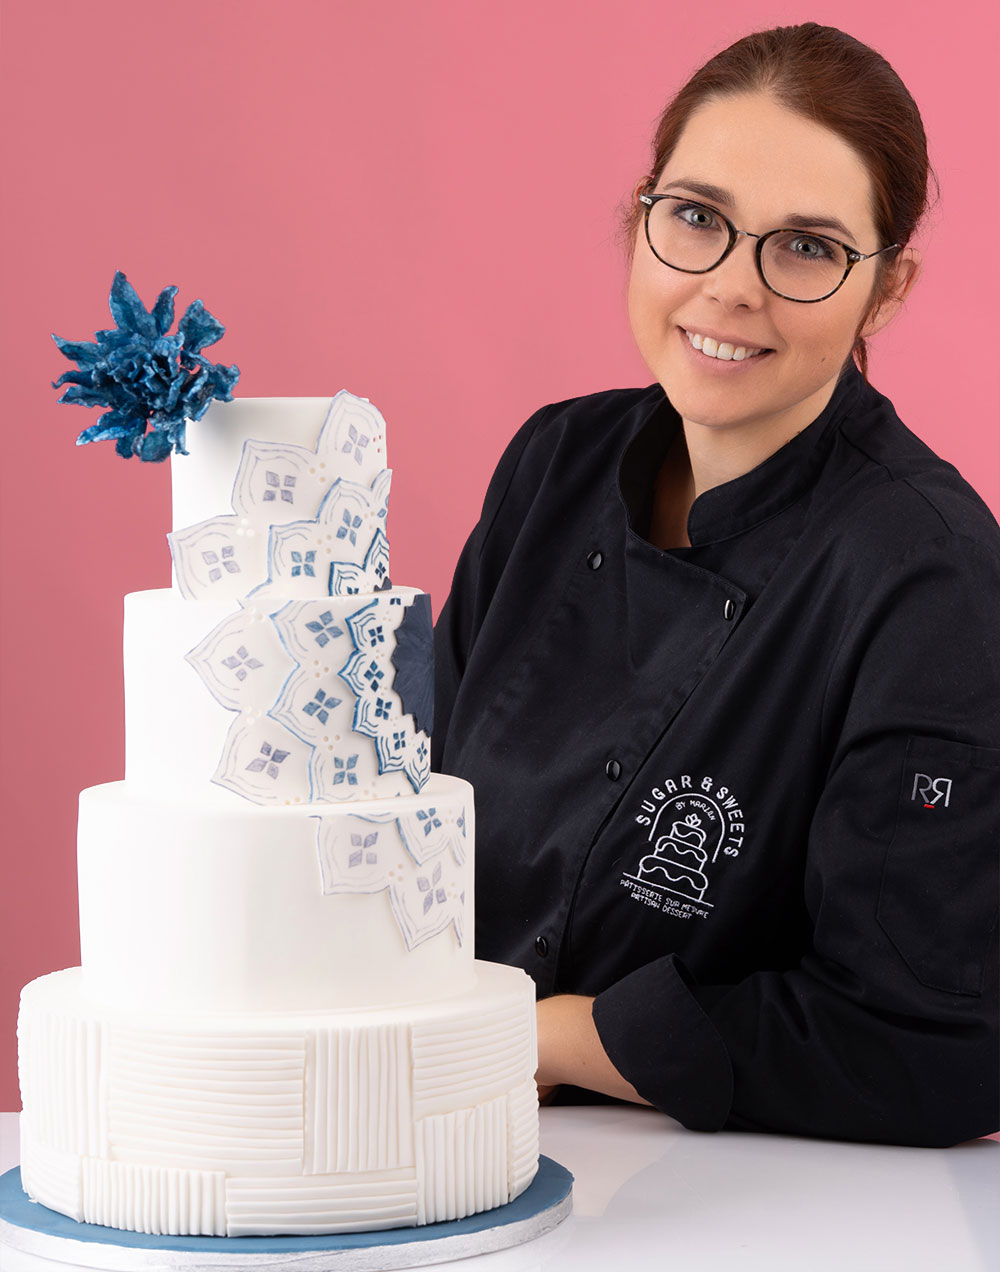 Sugar & Sweets By Marion | Cake Design